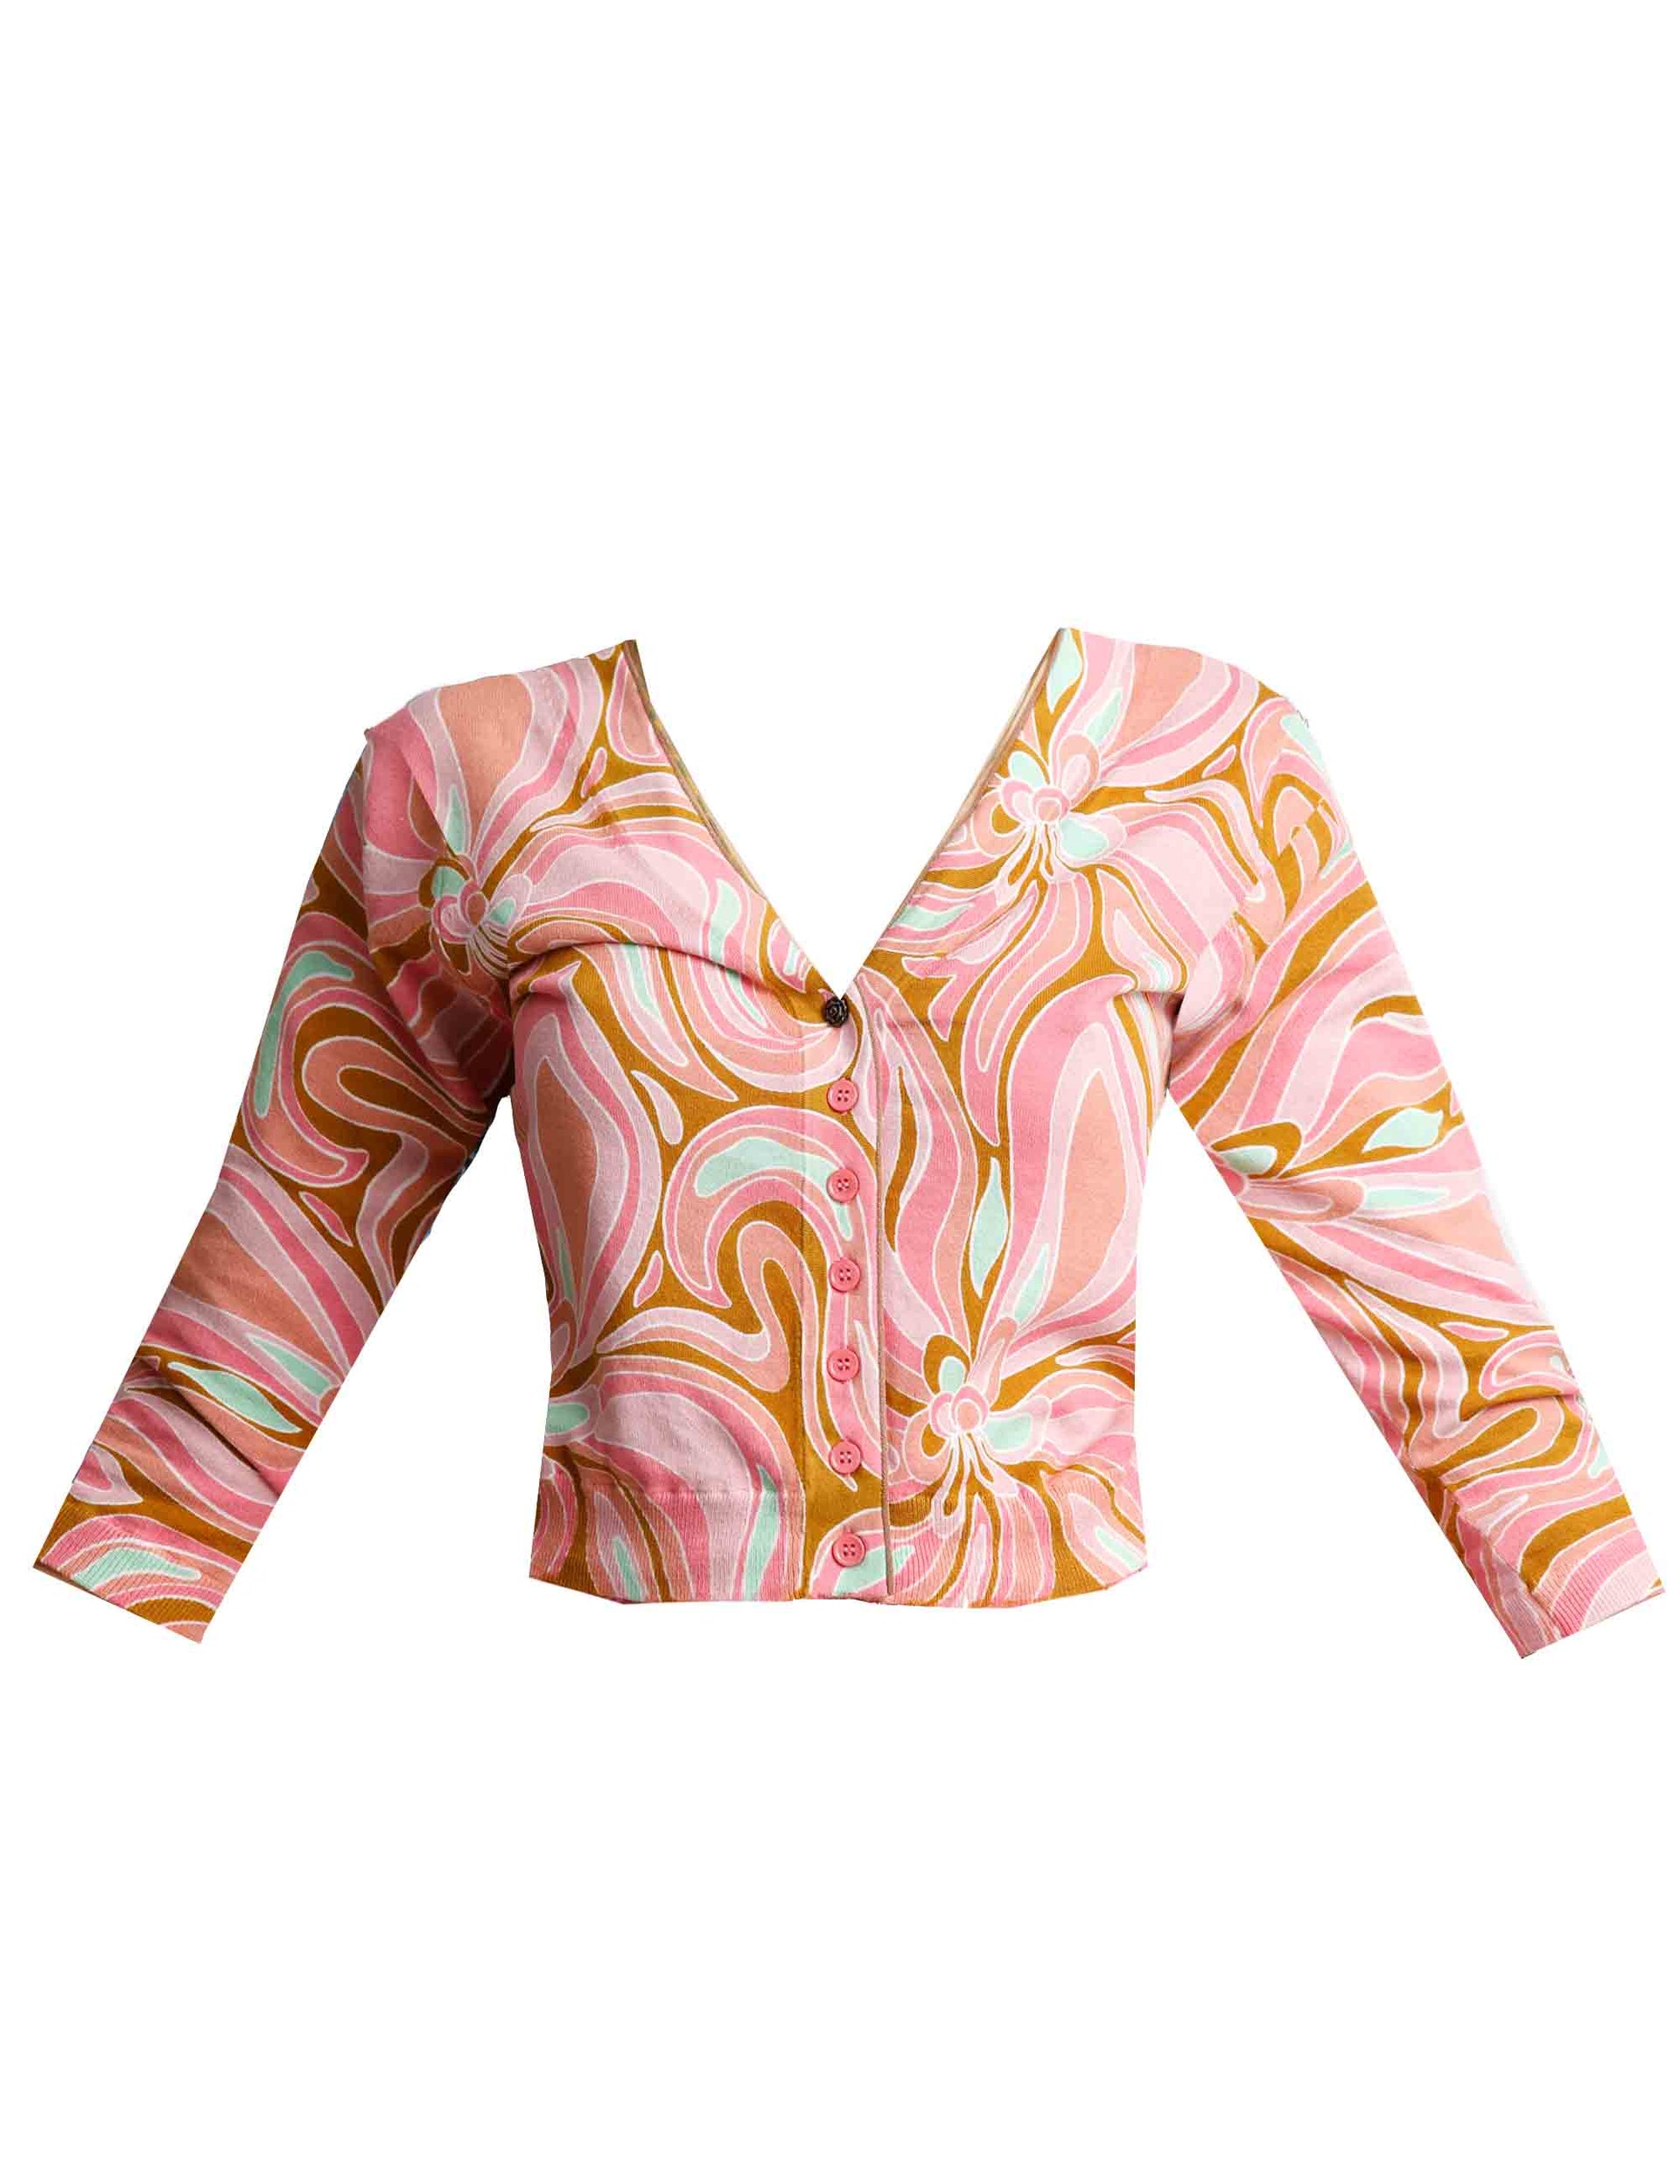 Printed women's cardigan sweaters in pink cotton with 3/4 sleeves